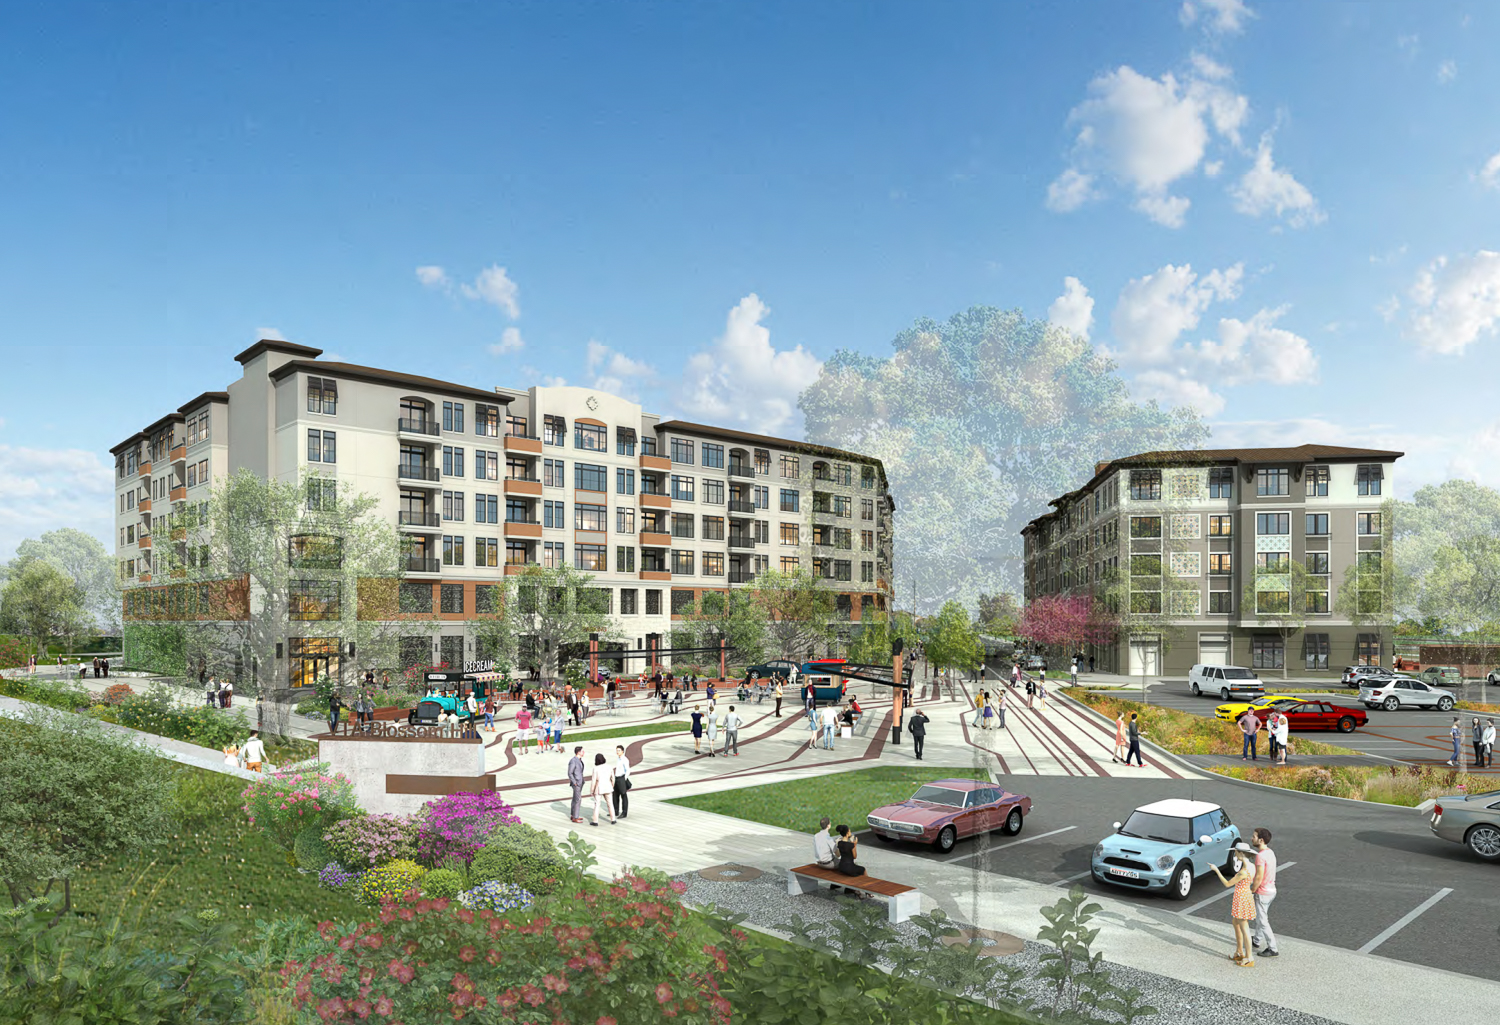 605 Blossom Hill Road south plaza view, rendering by Swenson